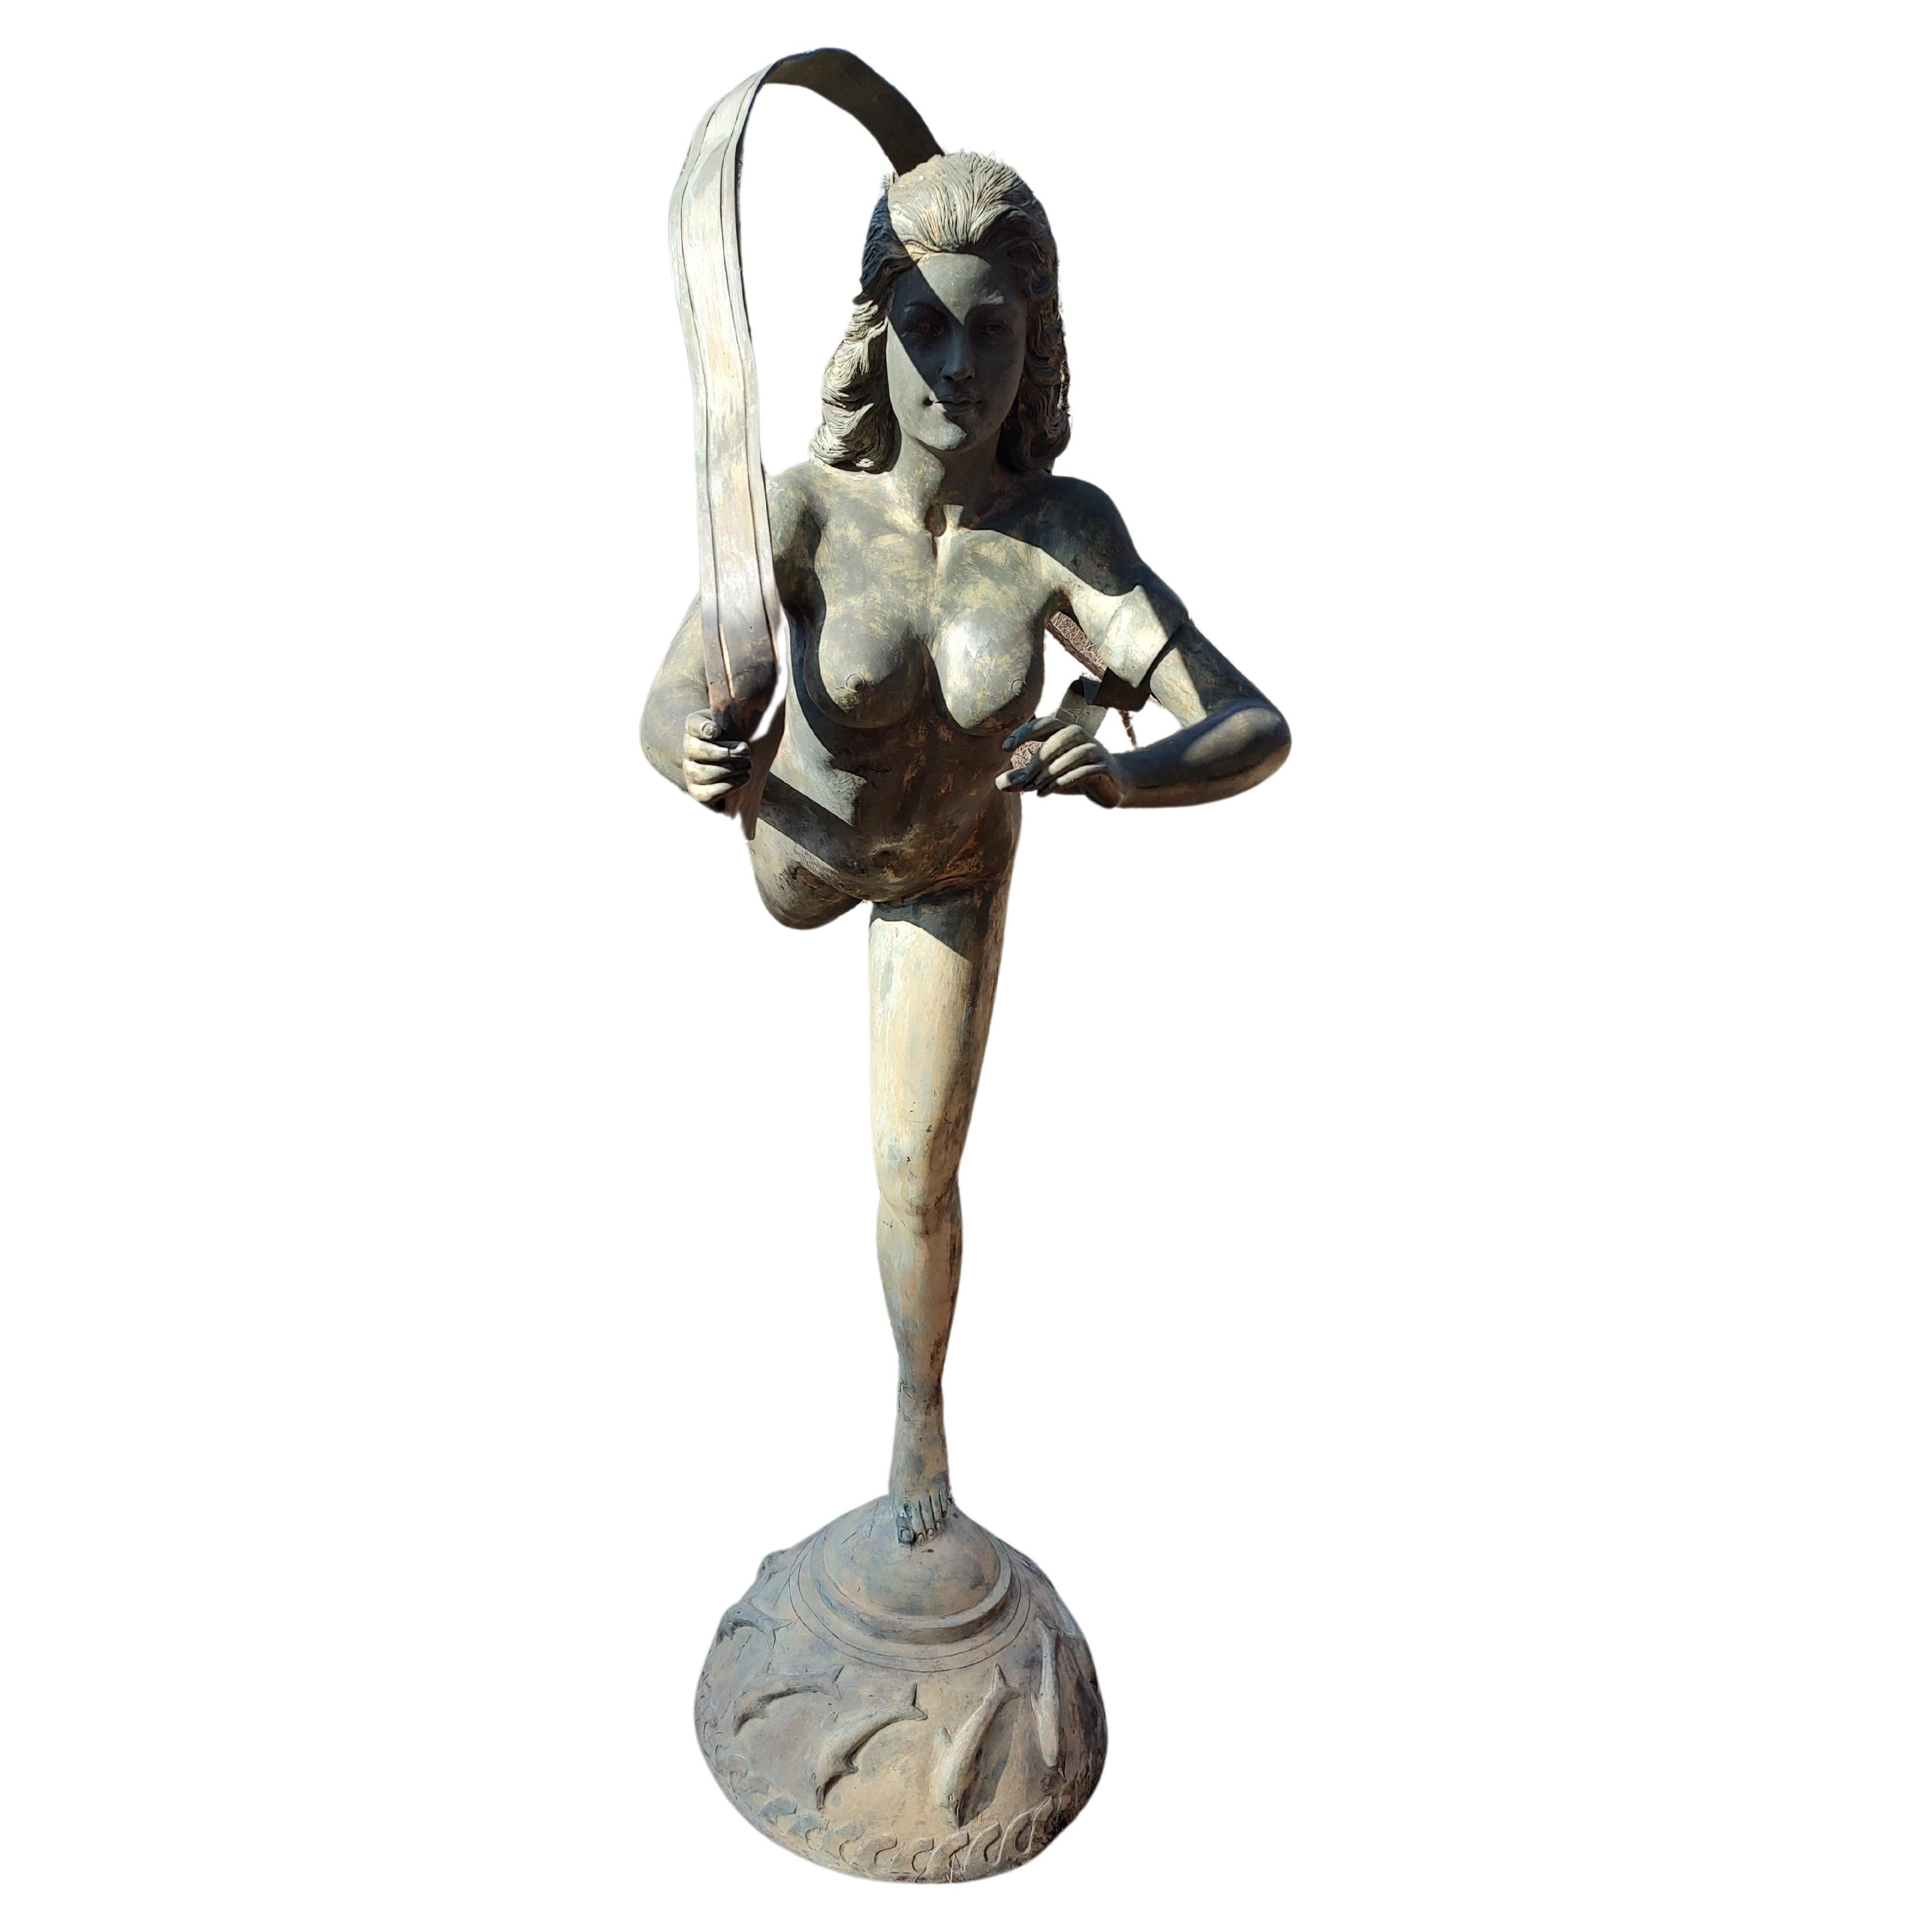 Fabulous and elegant bronze figure of a nude woman gliding, dancing forward. In the style of Messenger of the Gods. Tall 6 ft 3inches by 68 wide will enhance your garden greatly. Floating thru with nothing but a veil, a statement piece for sure. In